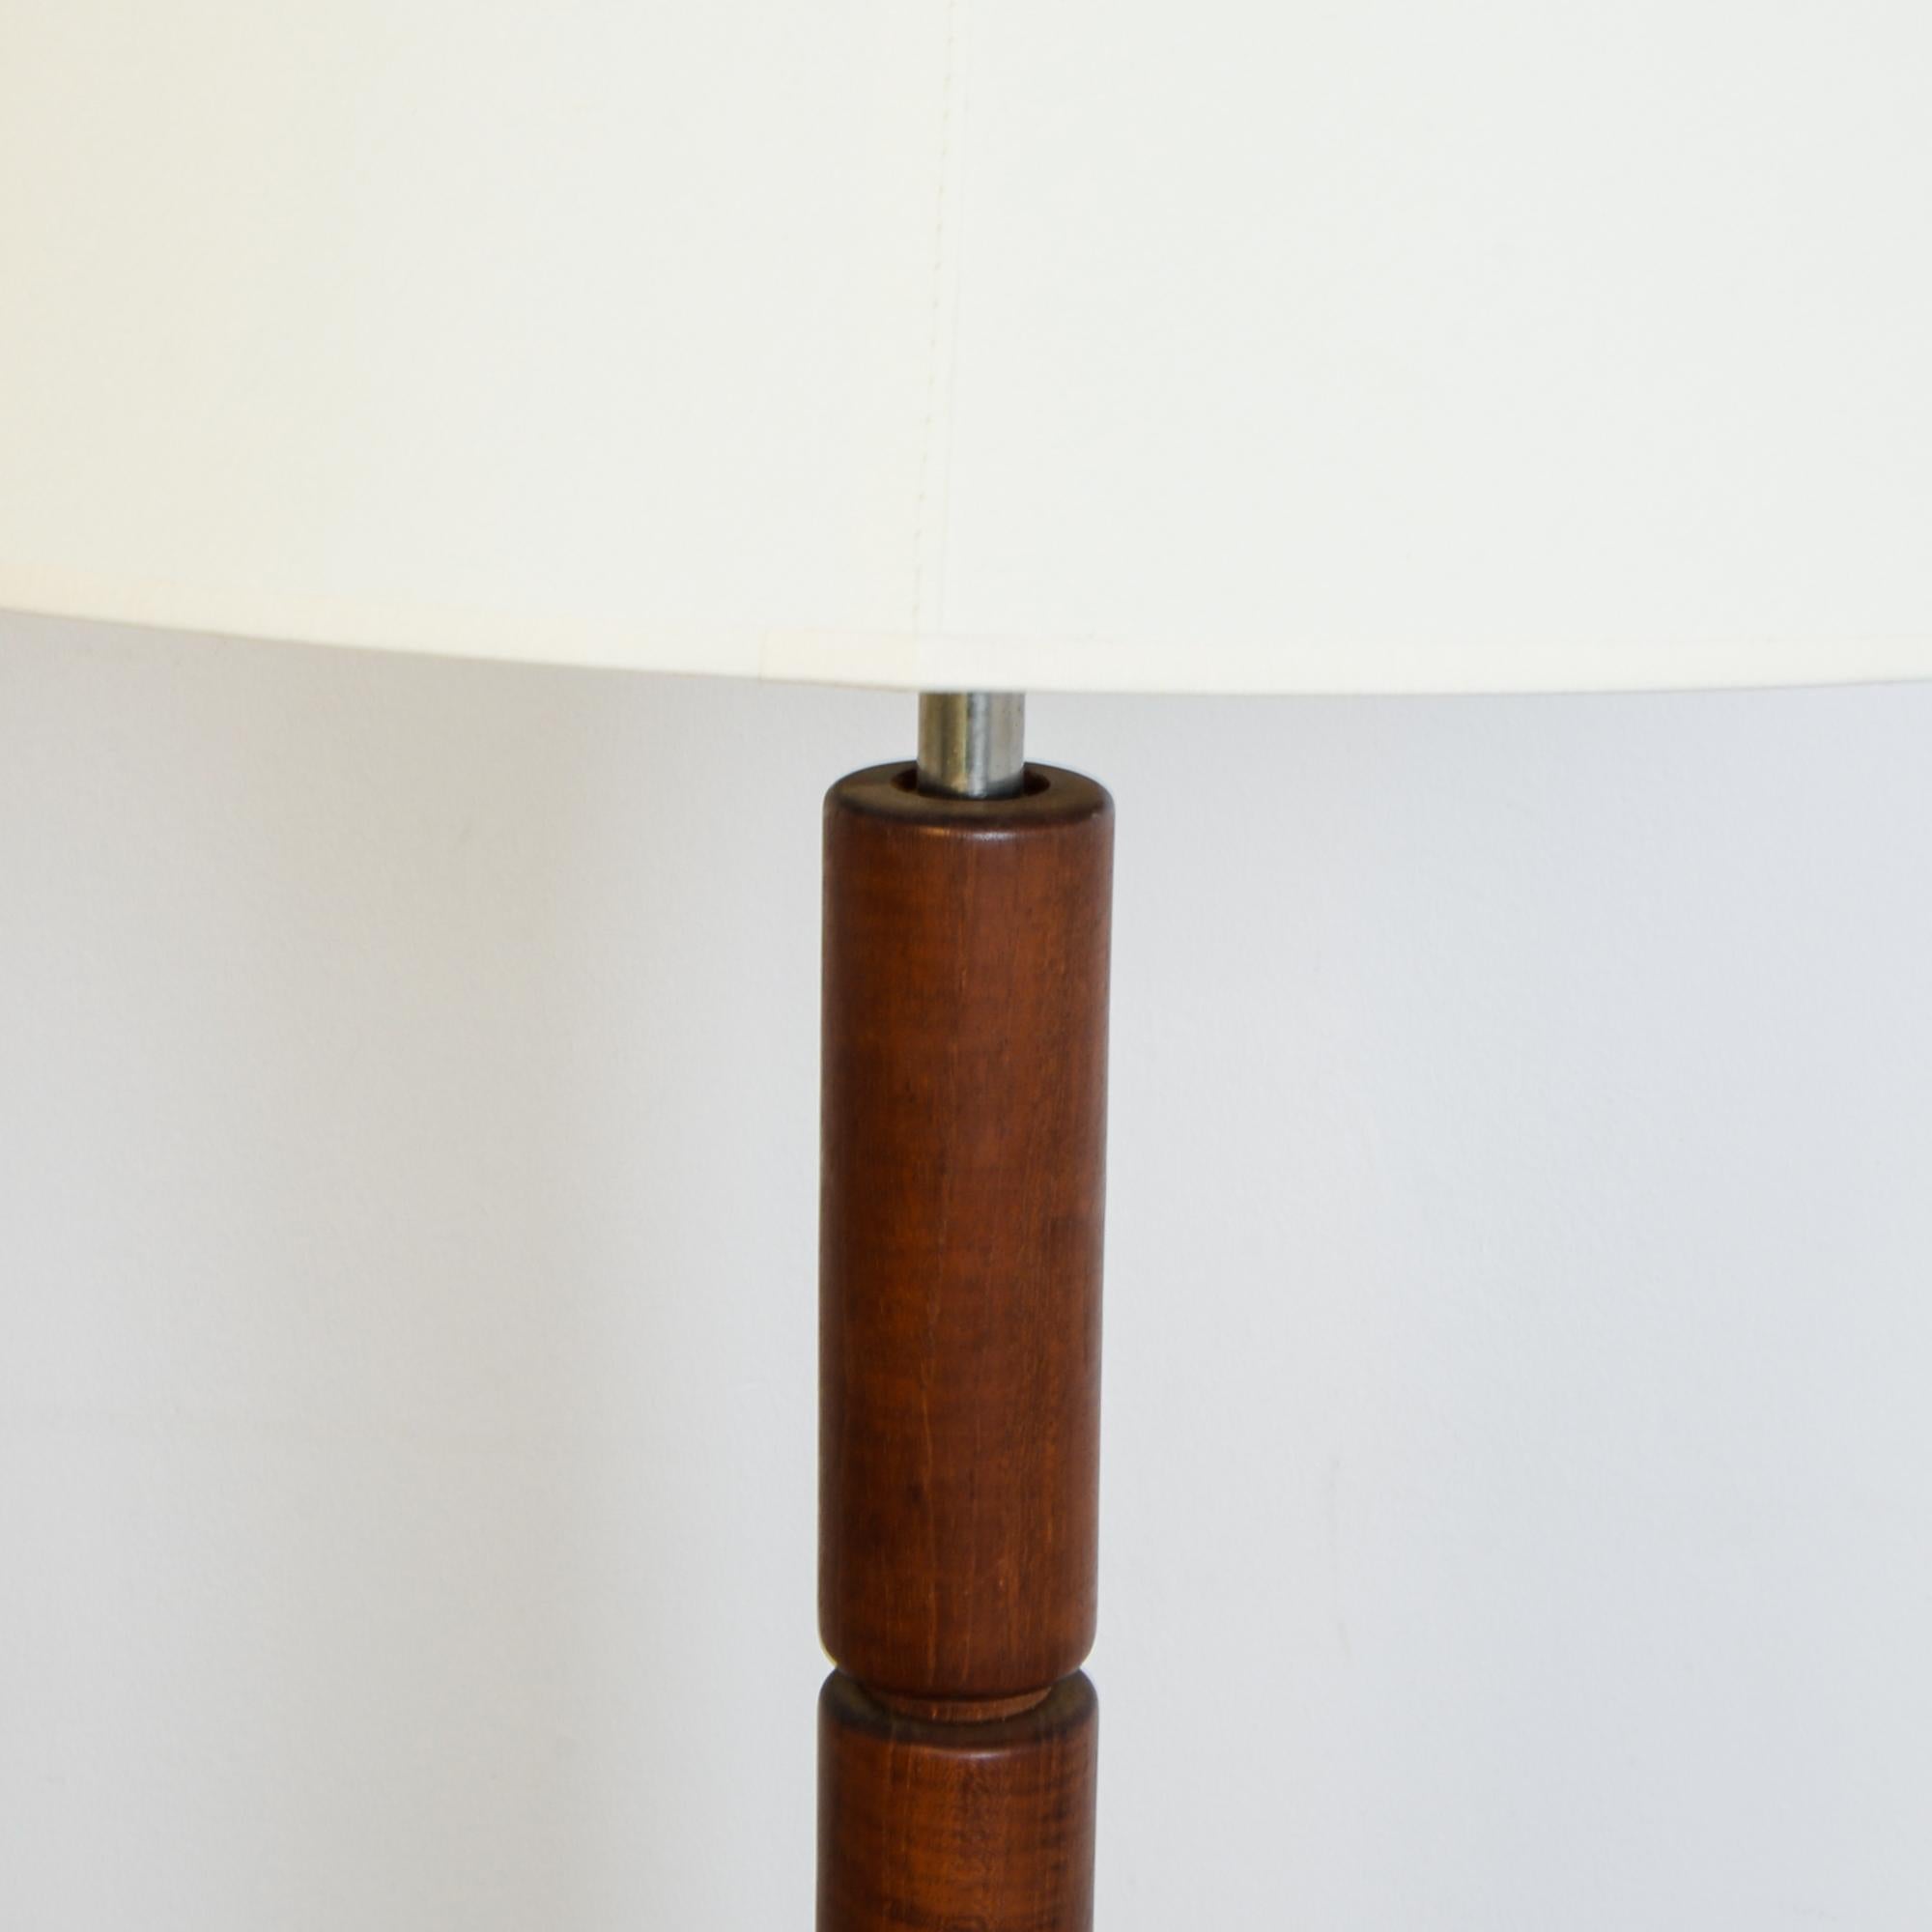 A hardwood lamp base from Denmark, circa 1960. Influenced by mid-20th century Danish modern furniture style, this lamp has a striking geometric profile, with modular elements carved from durable teak. Scandinavian style electrified, with updated